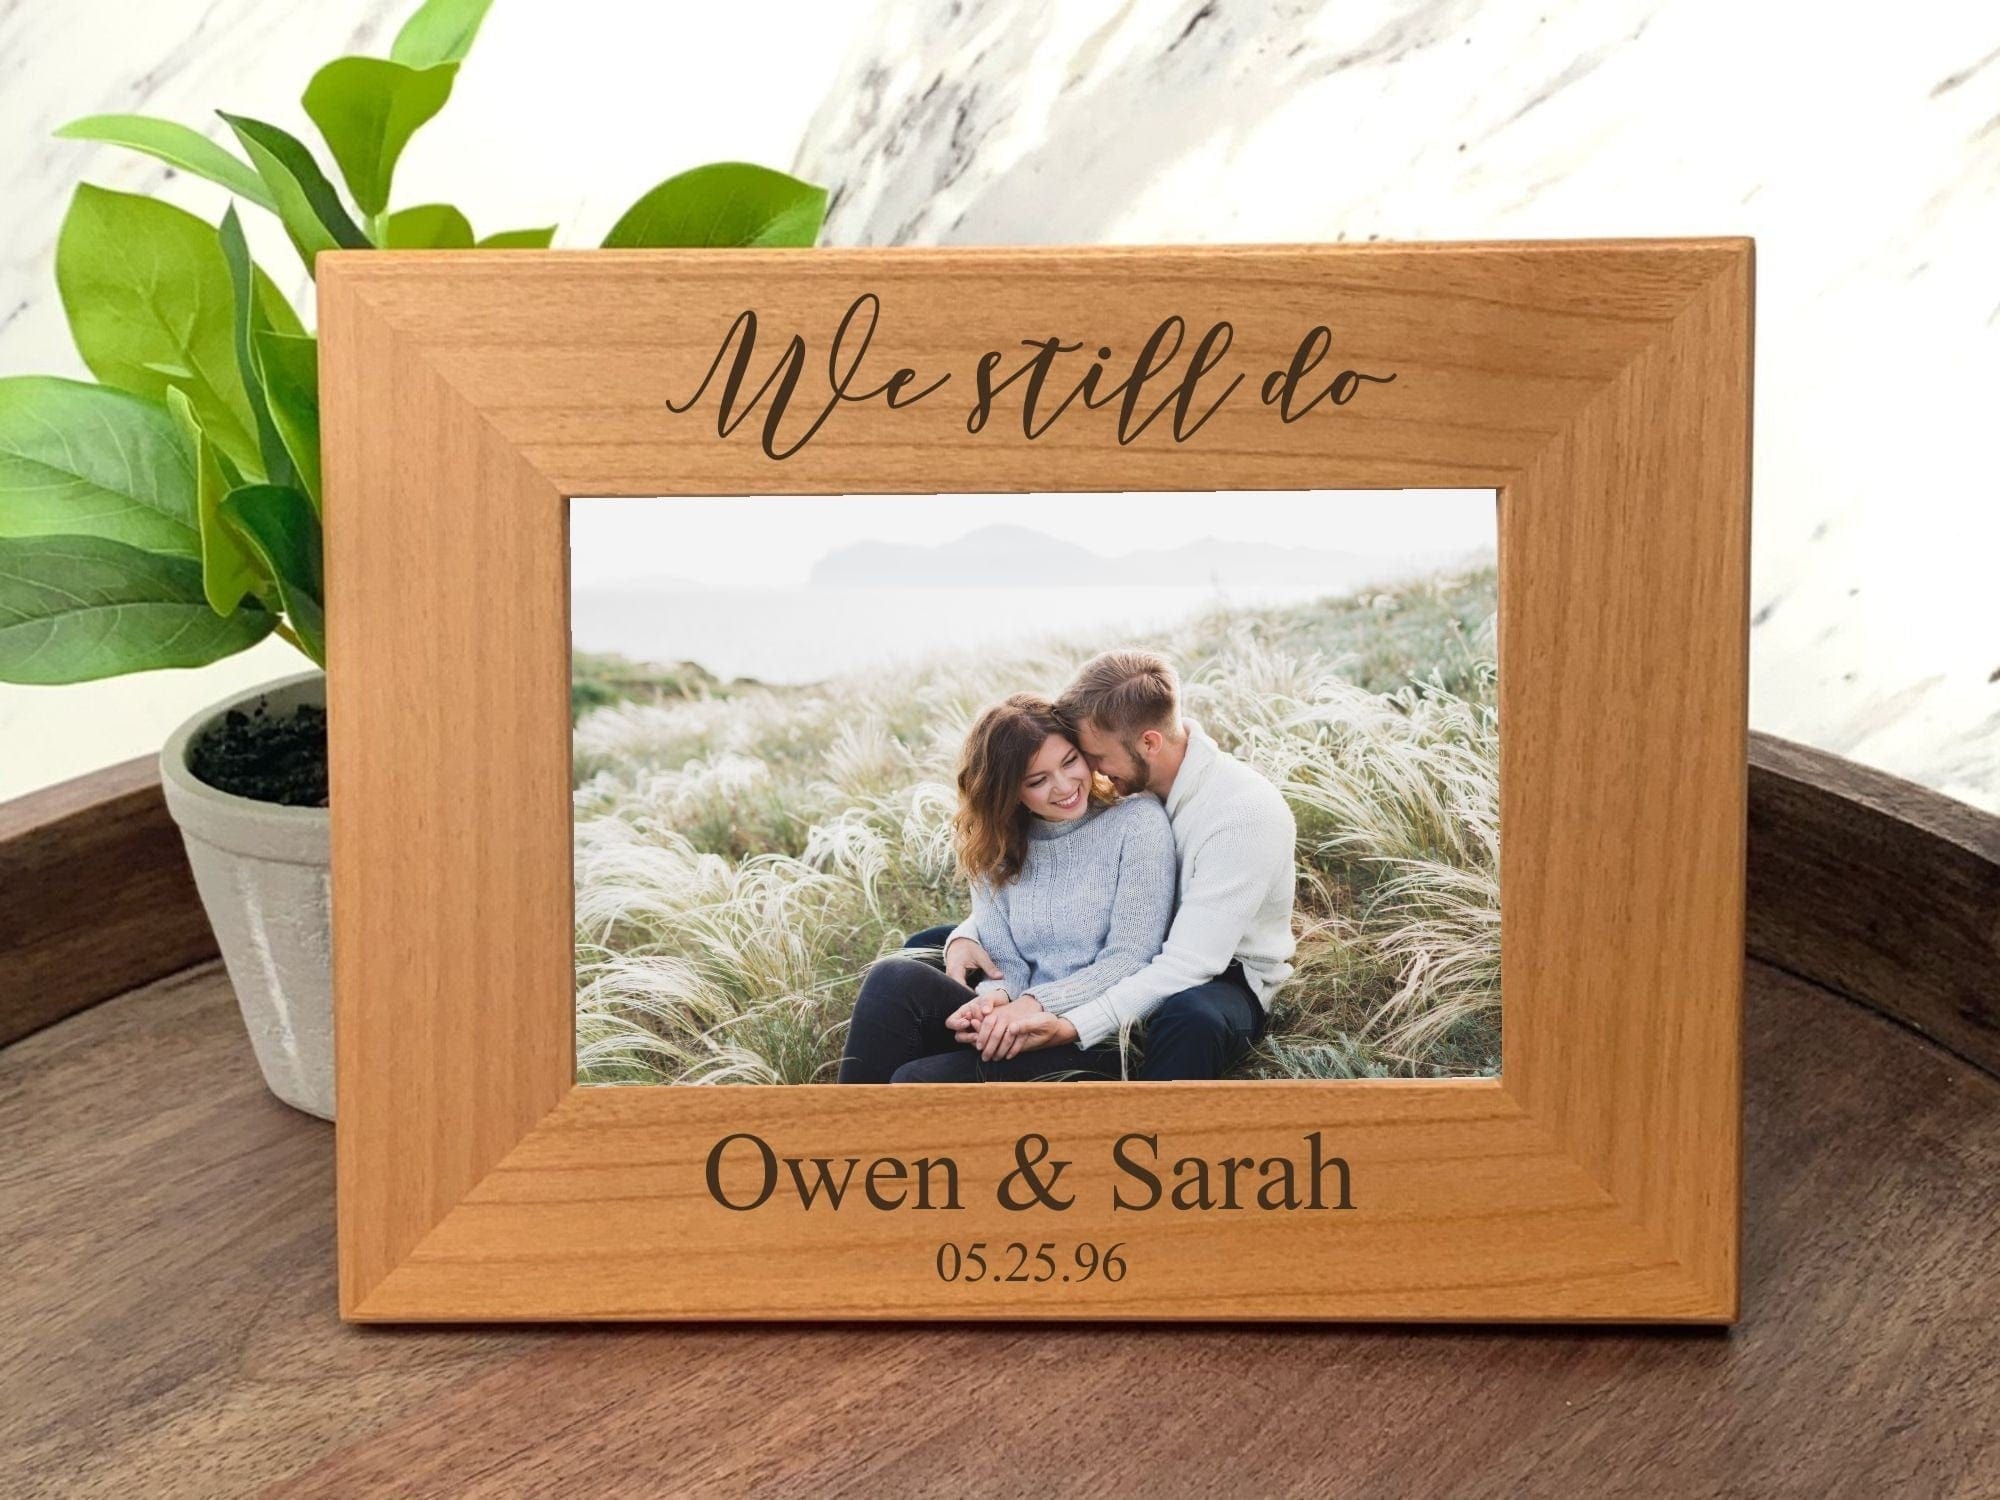 Run Wild Engraving picture frame two names date Anniversary Picture Frame Engraved